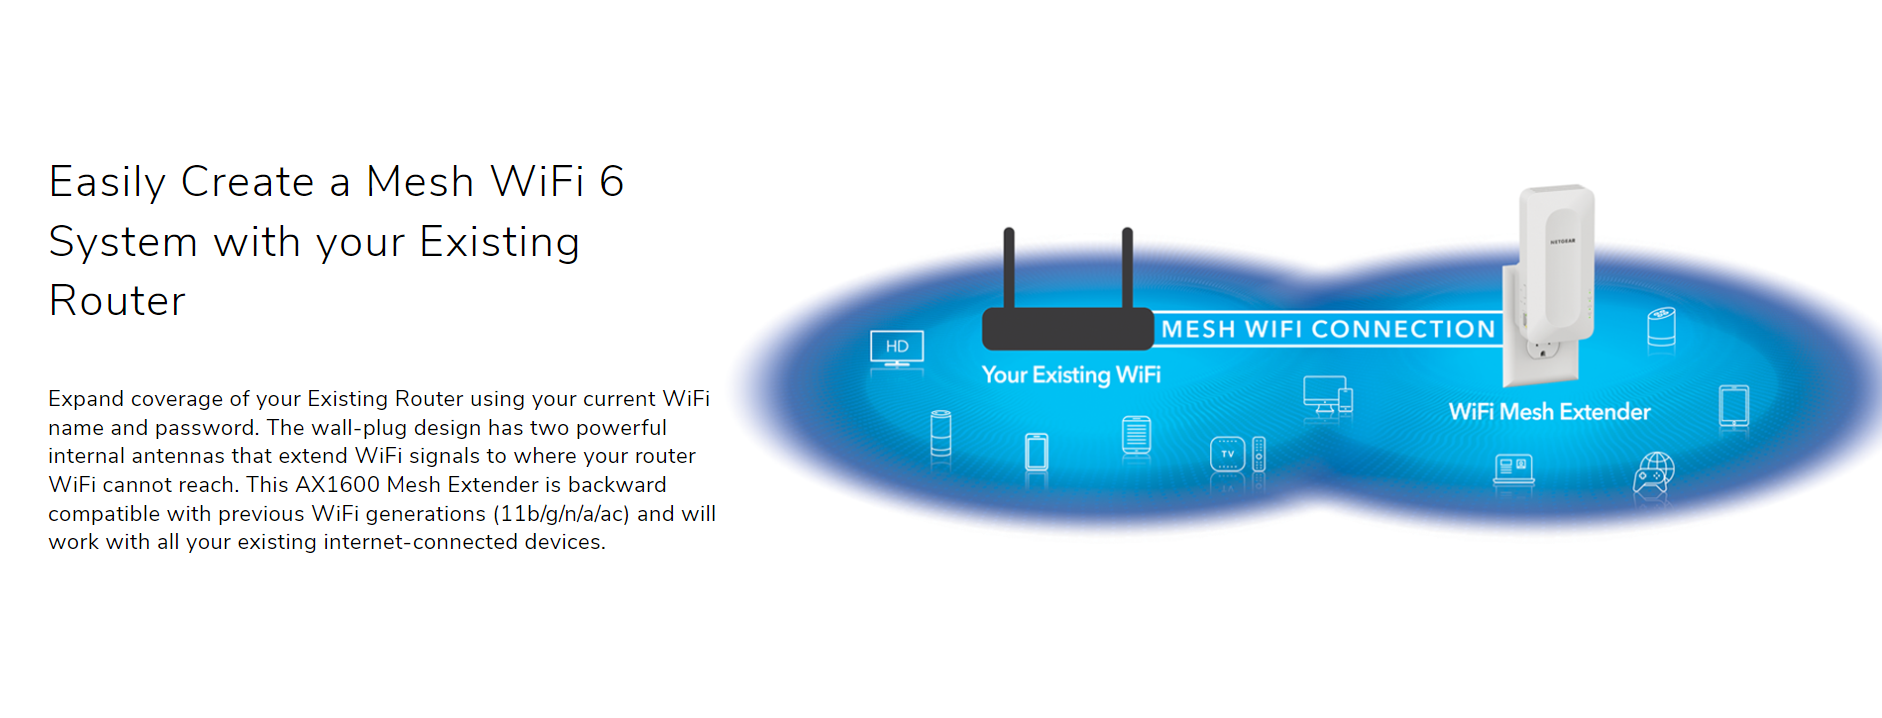 Image of Easily Create a Mesh WiFi 6 System with your Existing Router